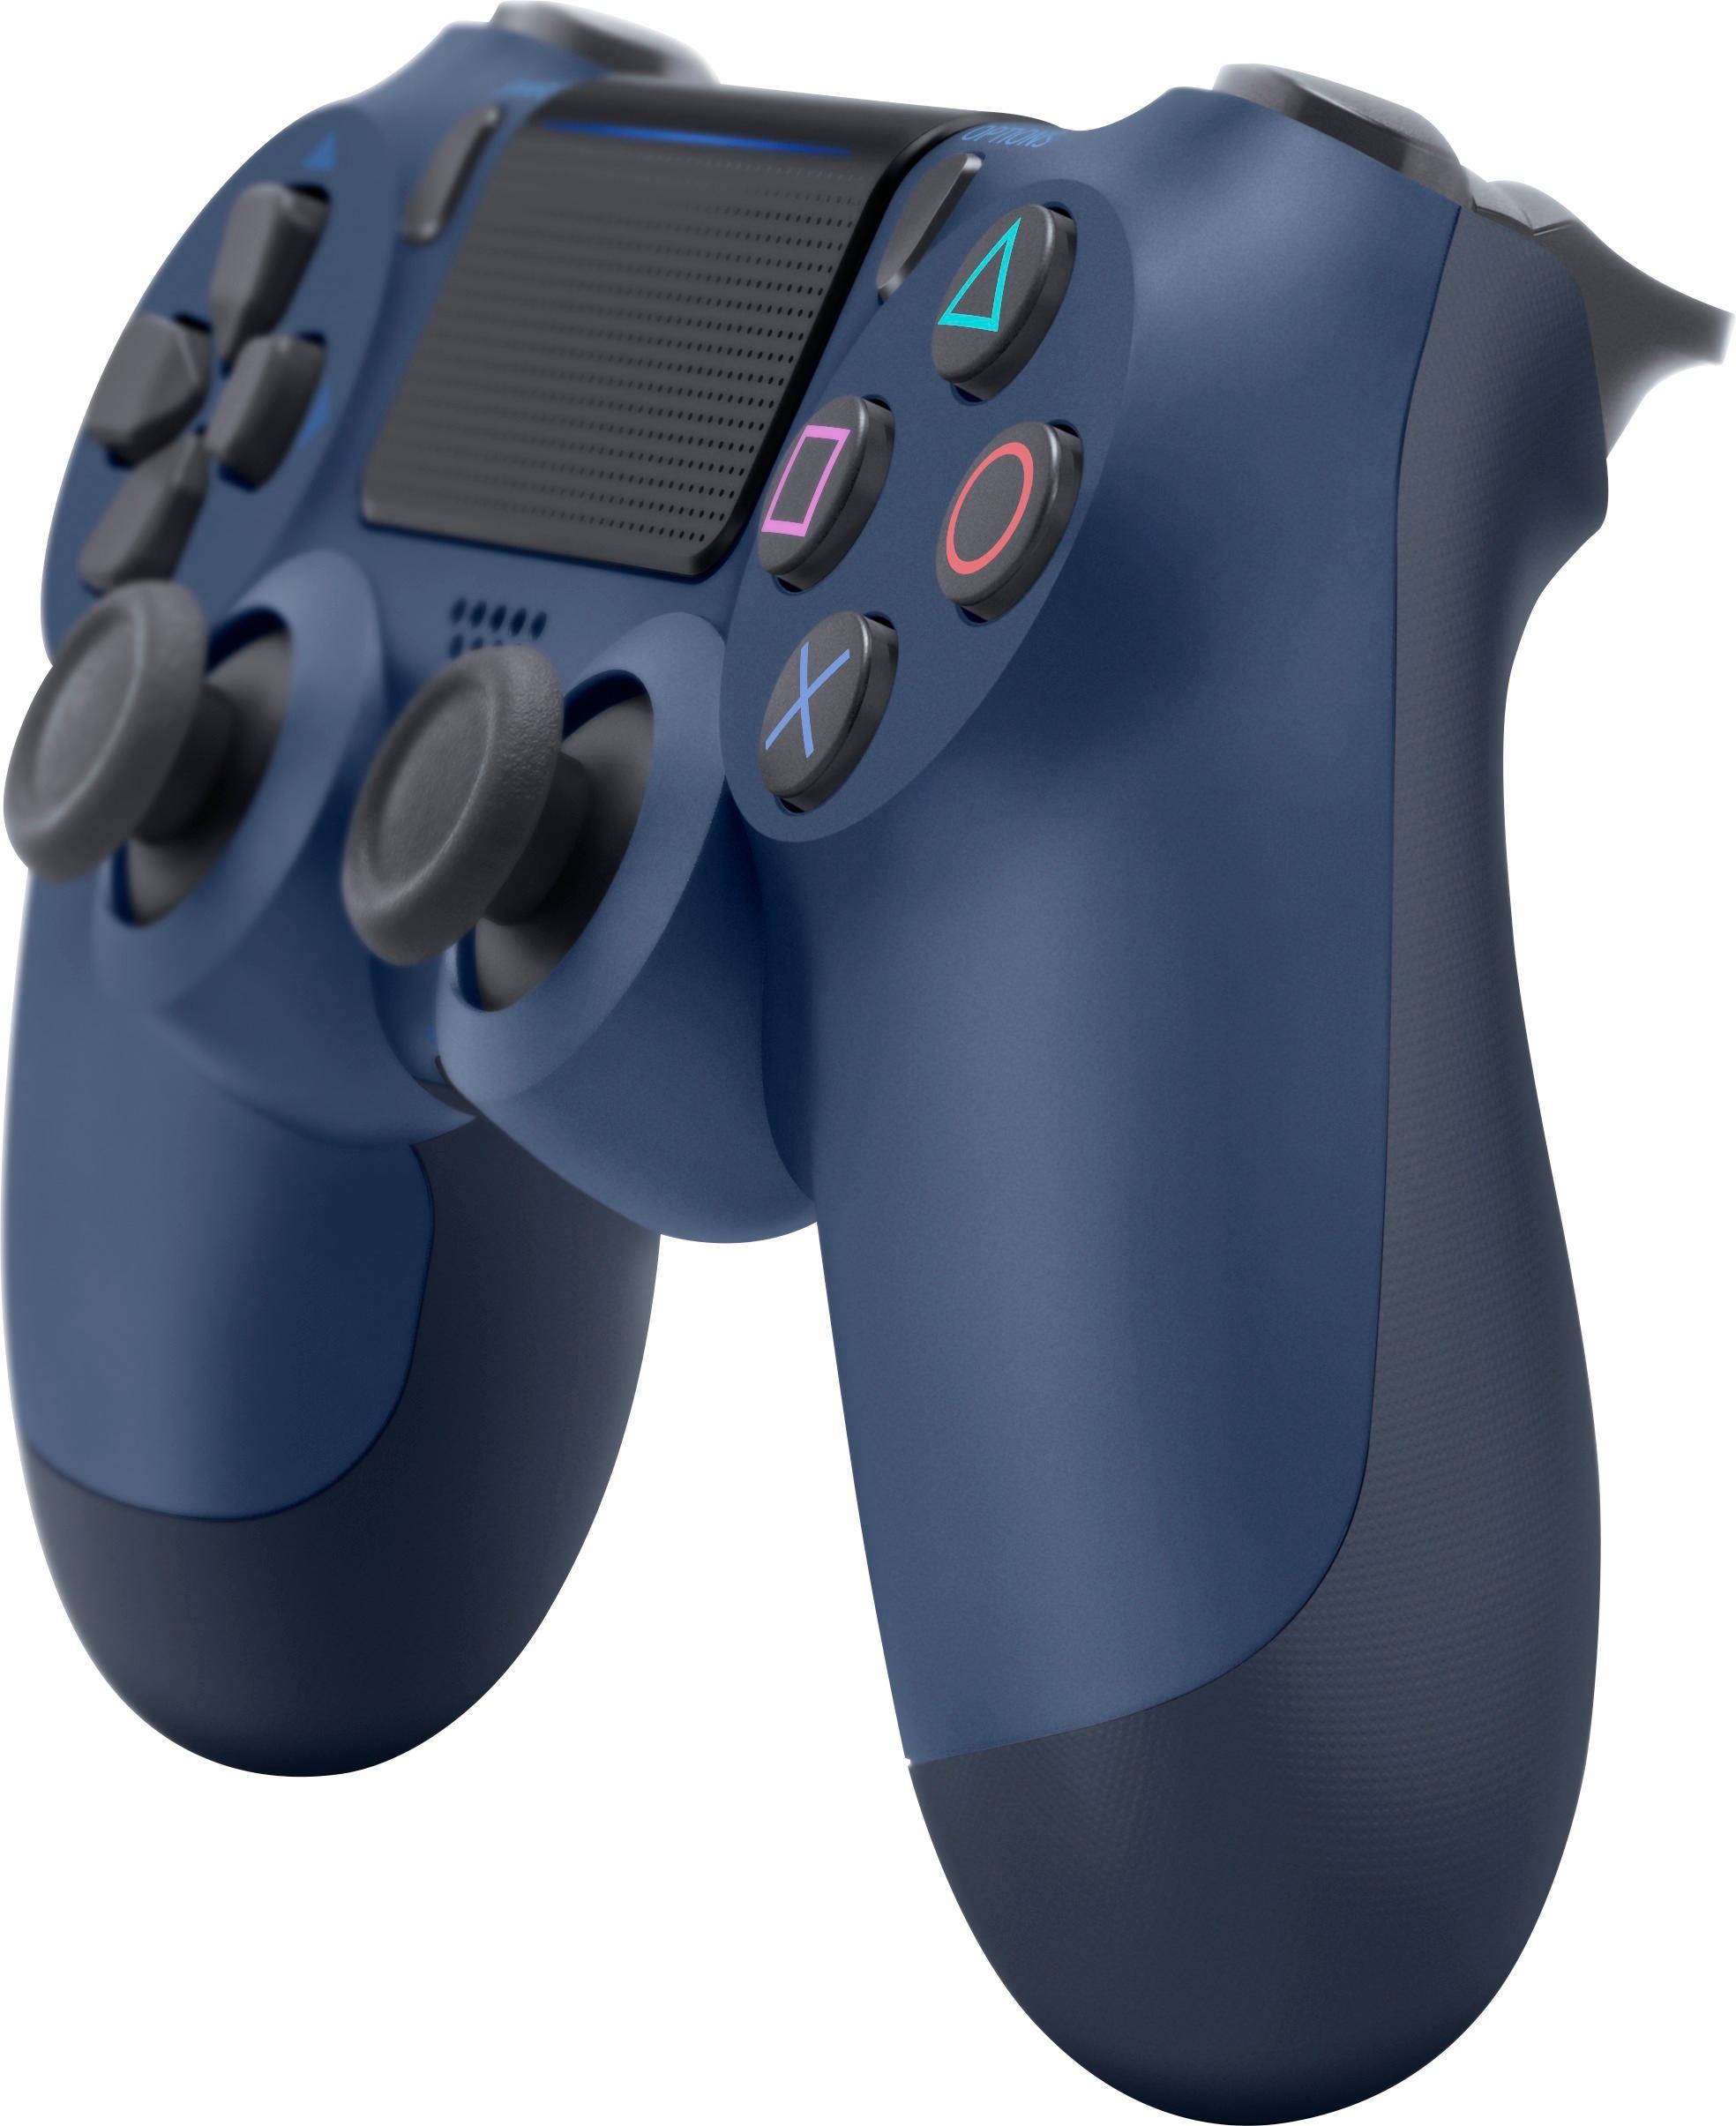 Fearless sadel meget fint DualShock 4 Wireless Controller for Sony PlayStation 4 Midnight Blue  3002840 - Best Buy